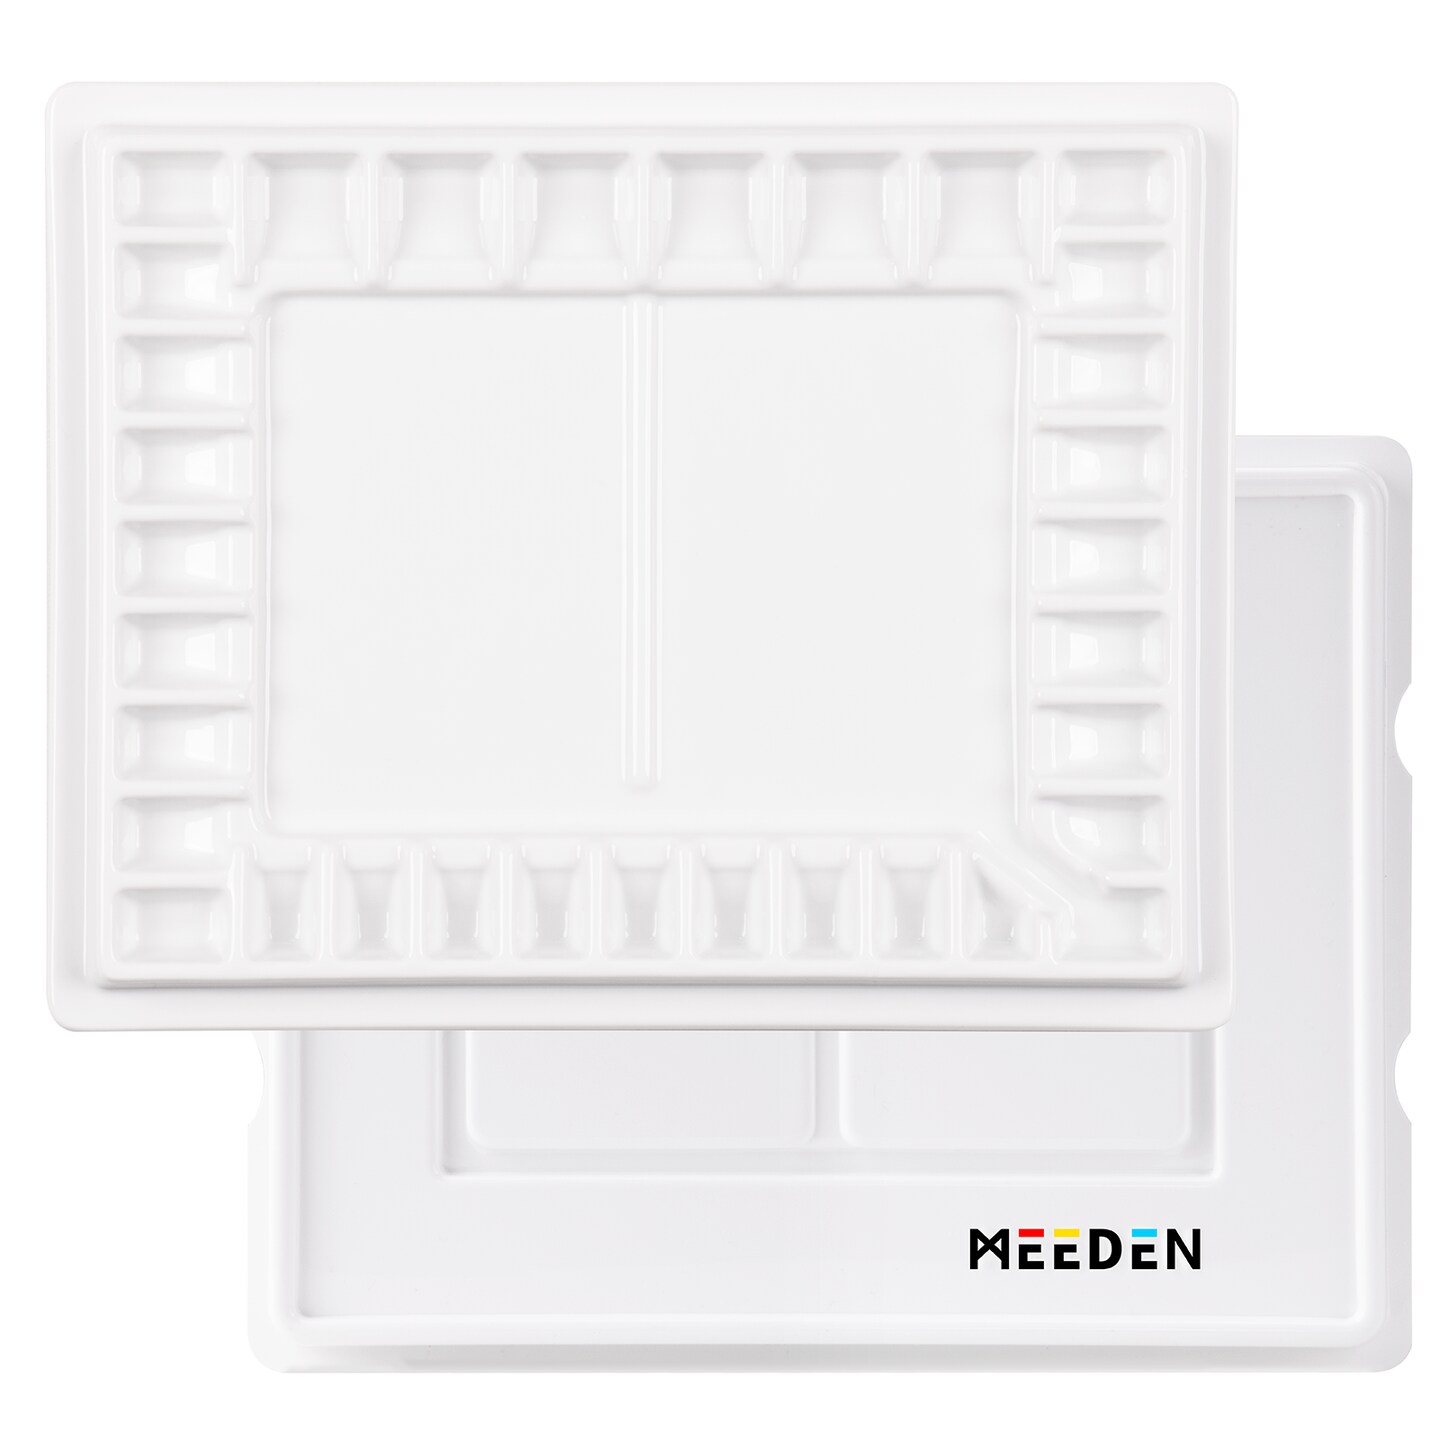 MEEDEN 33-Well Porcelain Painting Palette with Plastic Cover